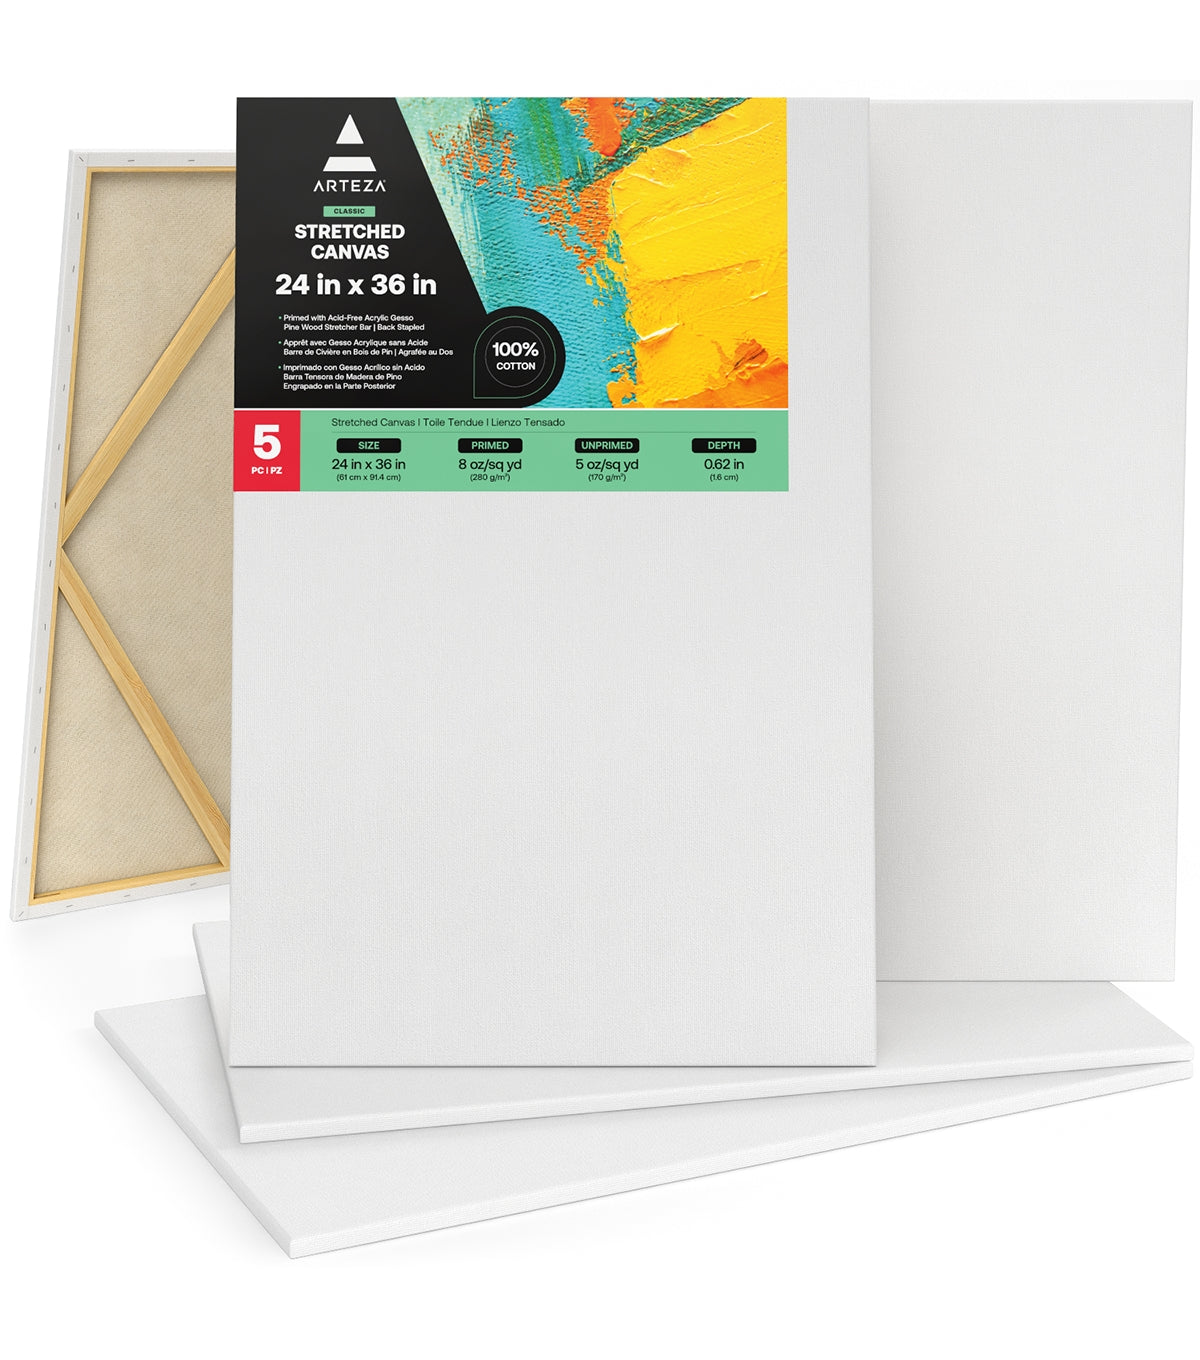  Stretched Canvases for Painting 2 Pack 24x36 Inch, 100